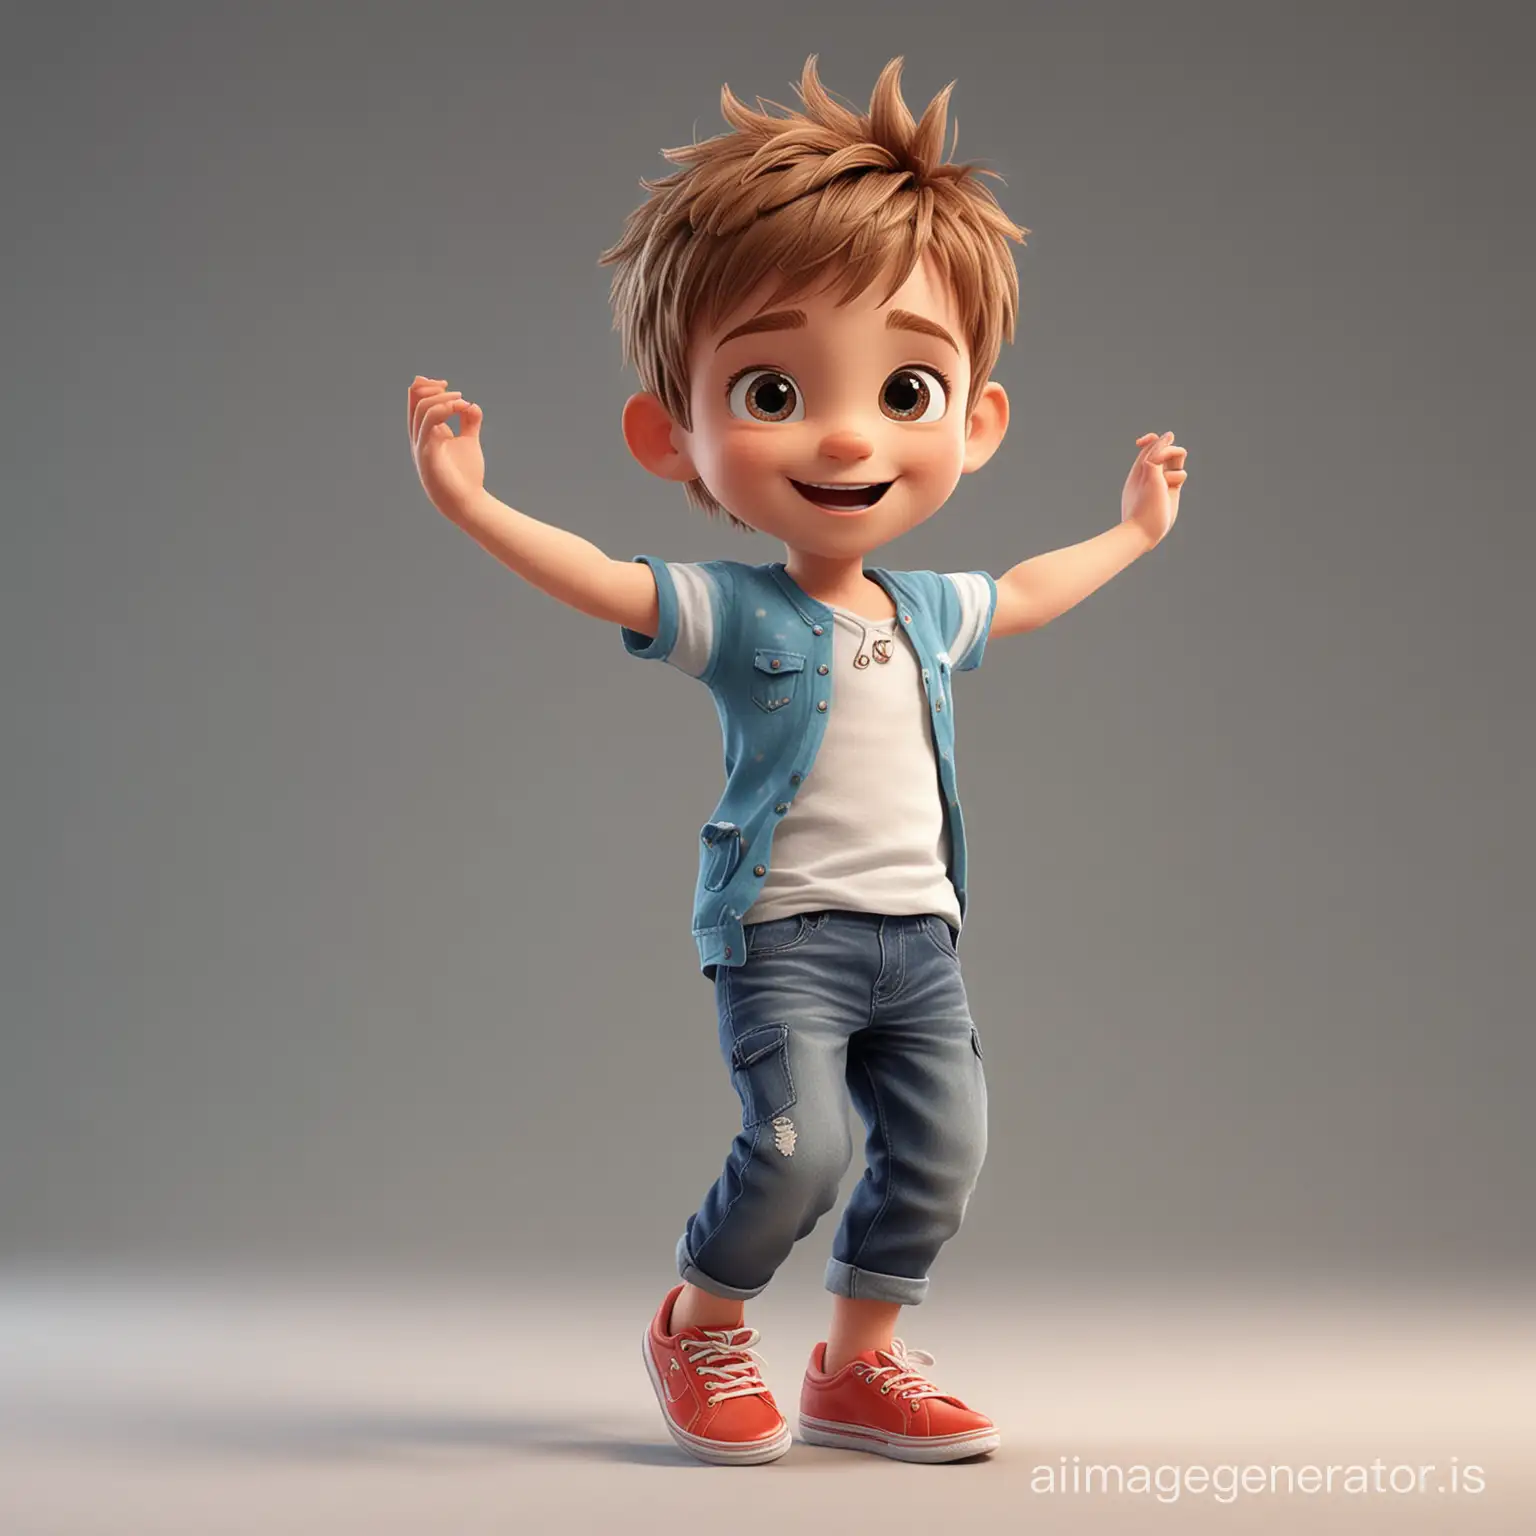 Little cute and sweet boy (full body), soft features in summer clothing, cute very sweet outfit, dancing excited and happy, animated 3d, story illustration, bright, ultra hd, 64K, bright, perfect prominent features, Dalle 3, 10:16 ratio